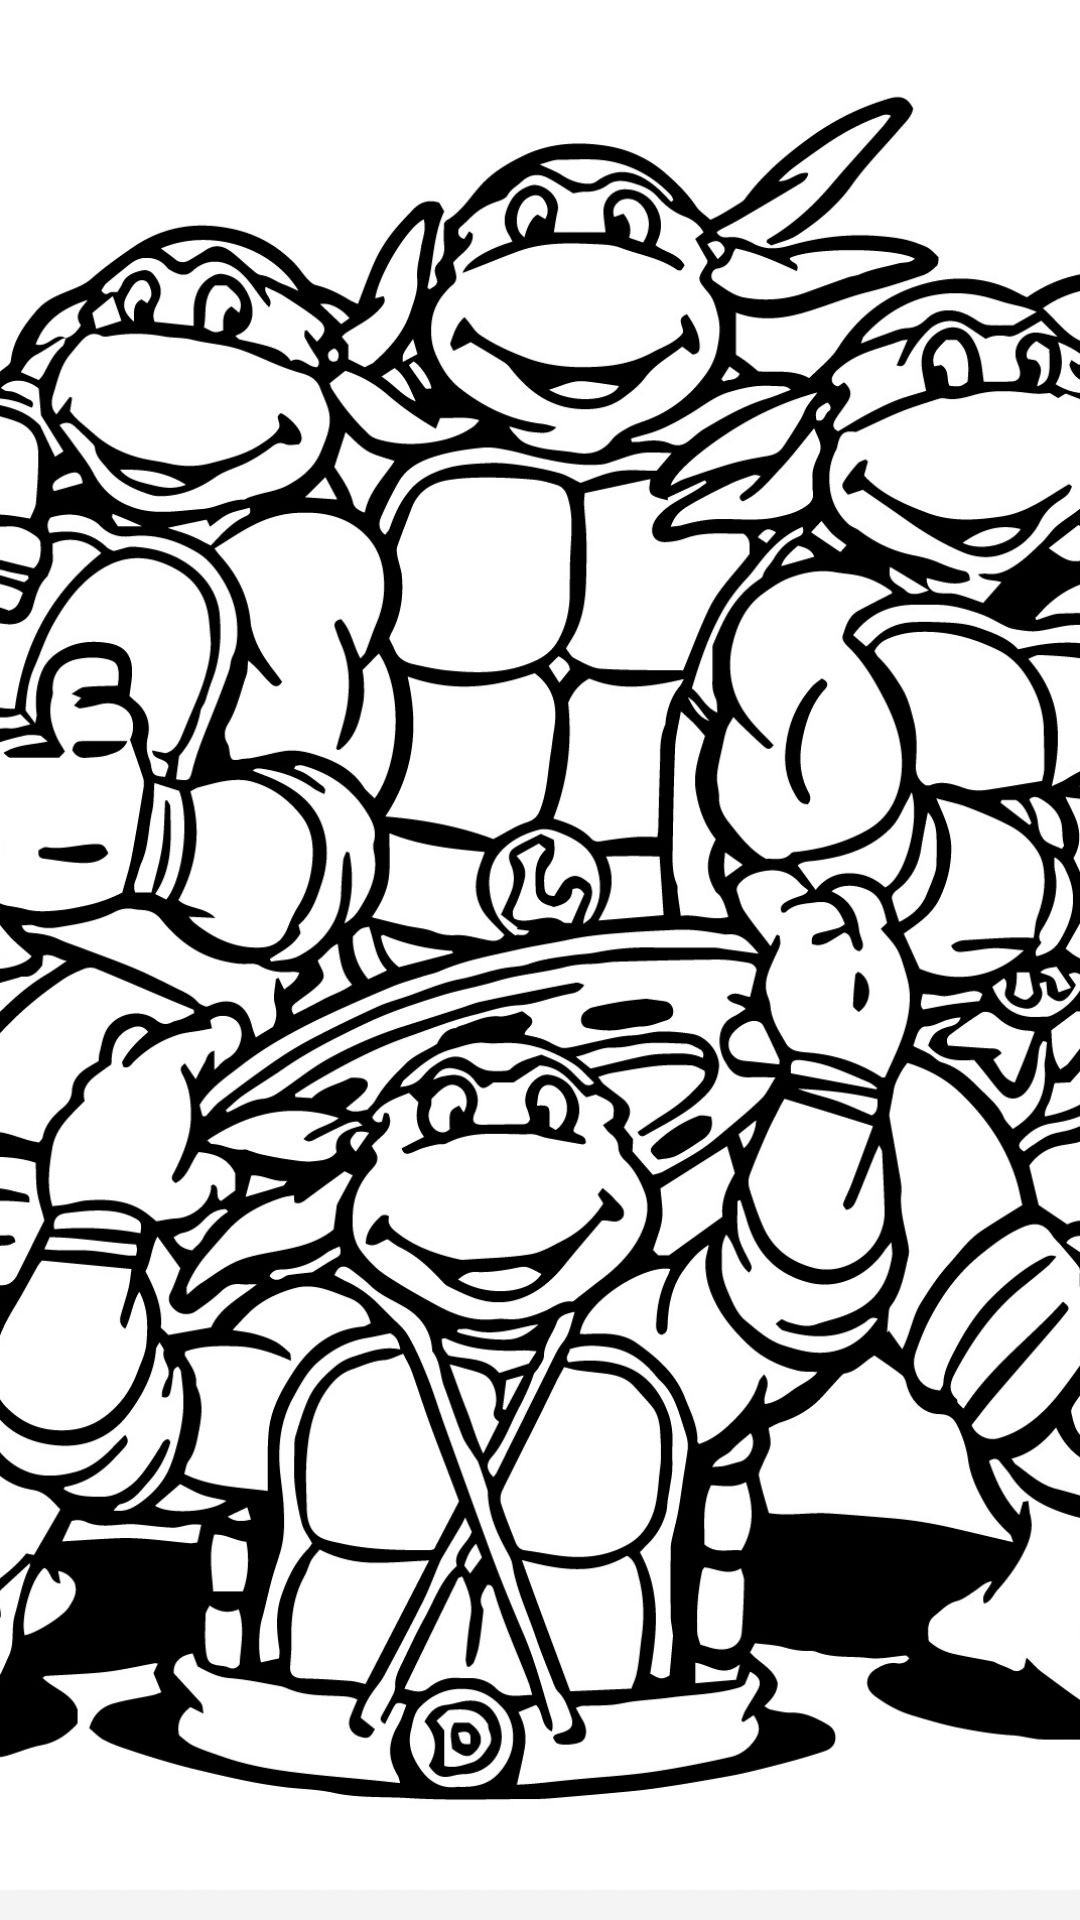 Coloring Pages For Boys Ninja Turltes
 Beautiful Printable Coloring Pages for Boys Ninja Turtles